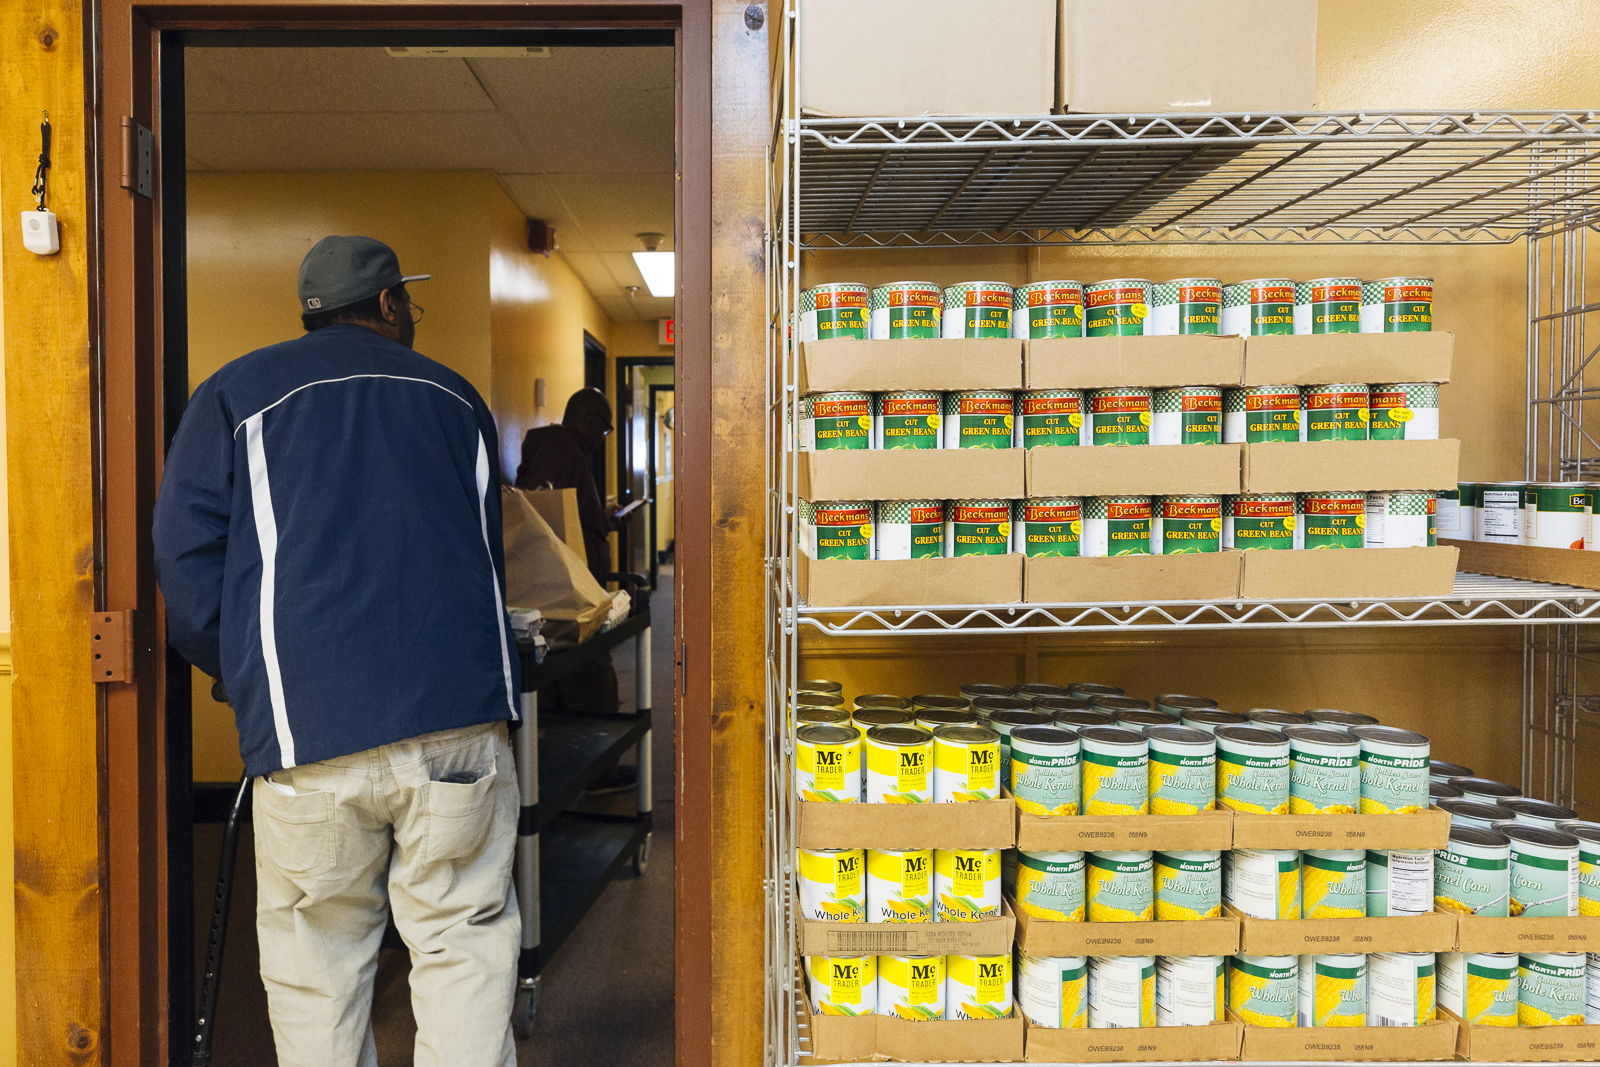 A view of the food pantry at Catholic Charities, 1325 Jefferson Avenue. (Ziggy Mack)